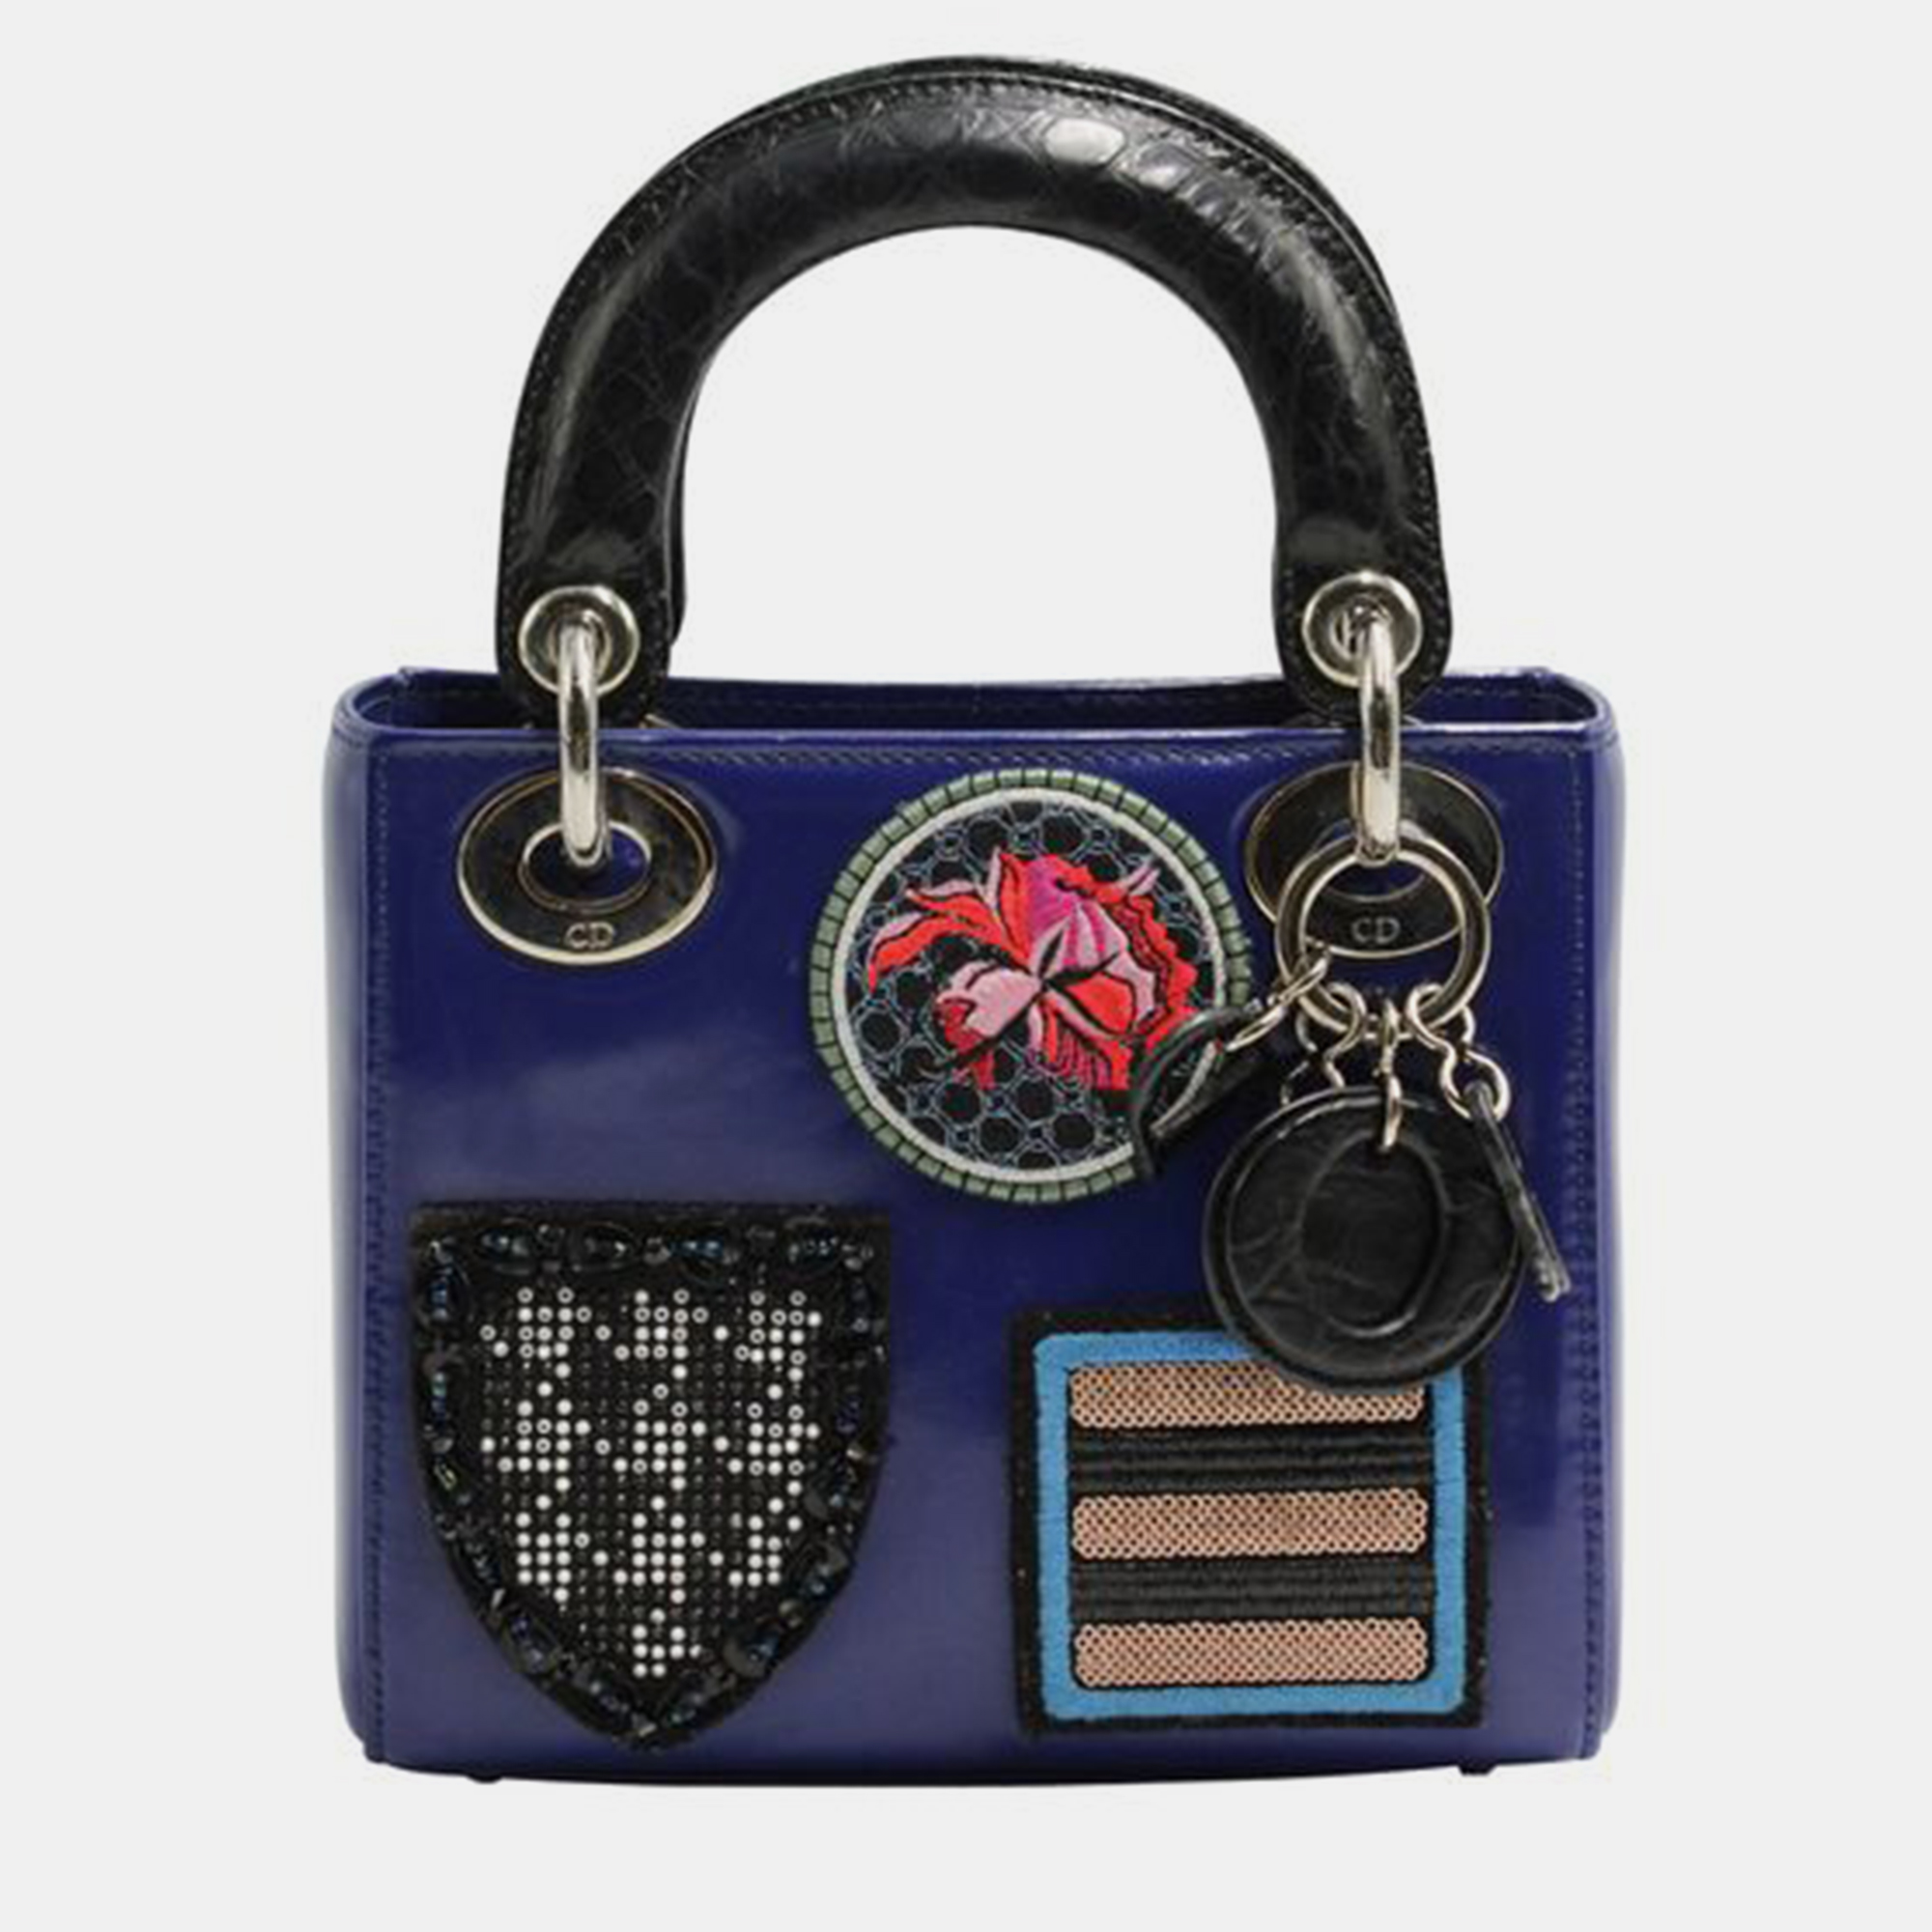 DIOR Mini Lady Dior Bag with Embroidered Badges - Limited Edition SS2014 HANDBAGS